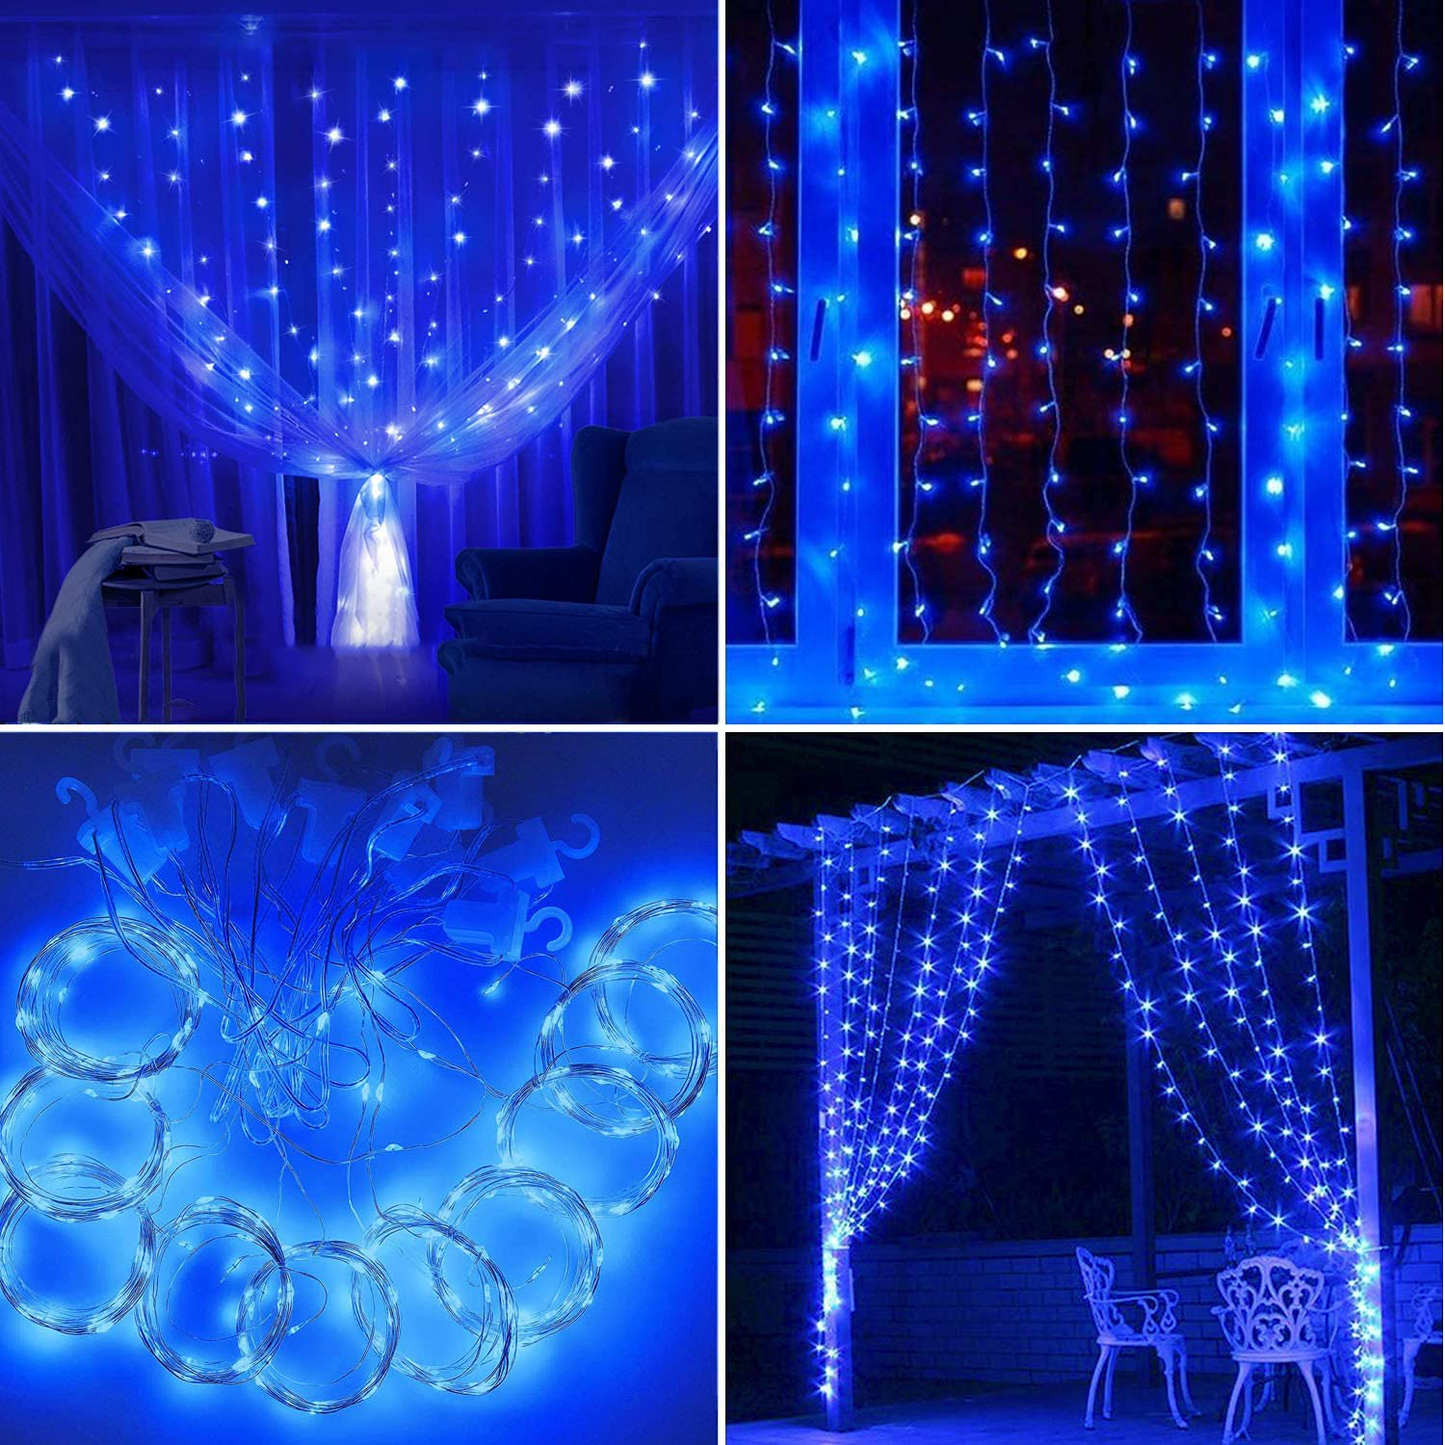 YEOLEH String Lights Curtain,USB Powered Fairy Lights for Party Bedroom Wall,8 Modes & IP64 Waterproof Ideal for Outdoor Wedding Home Garden Decor (Warm White,7.9Ft x 5.9Ft)